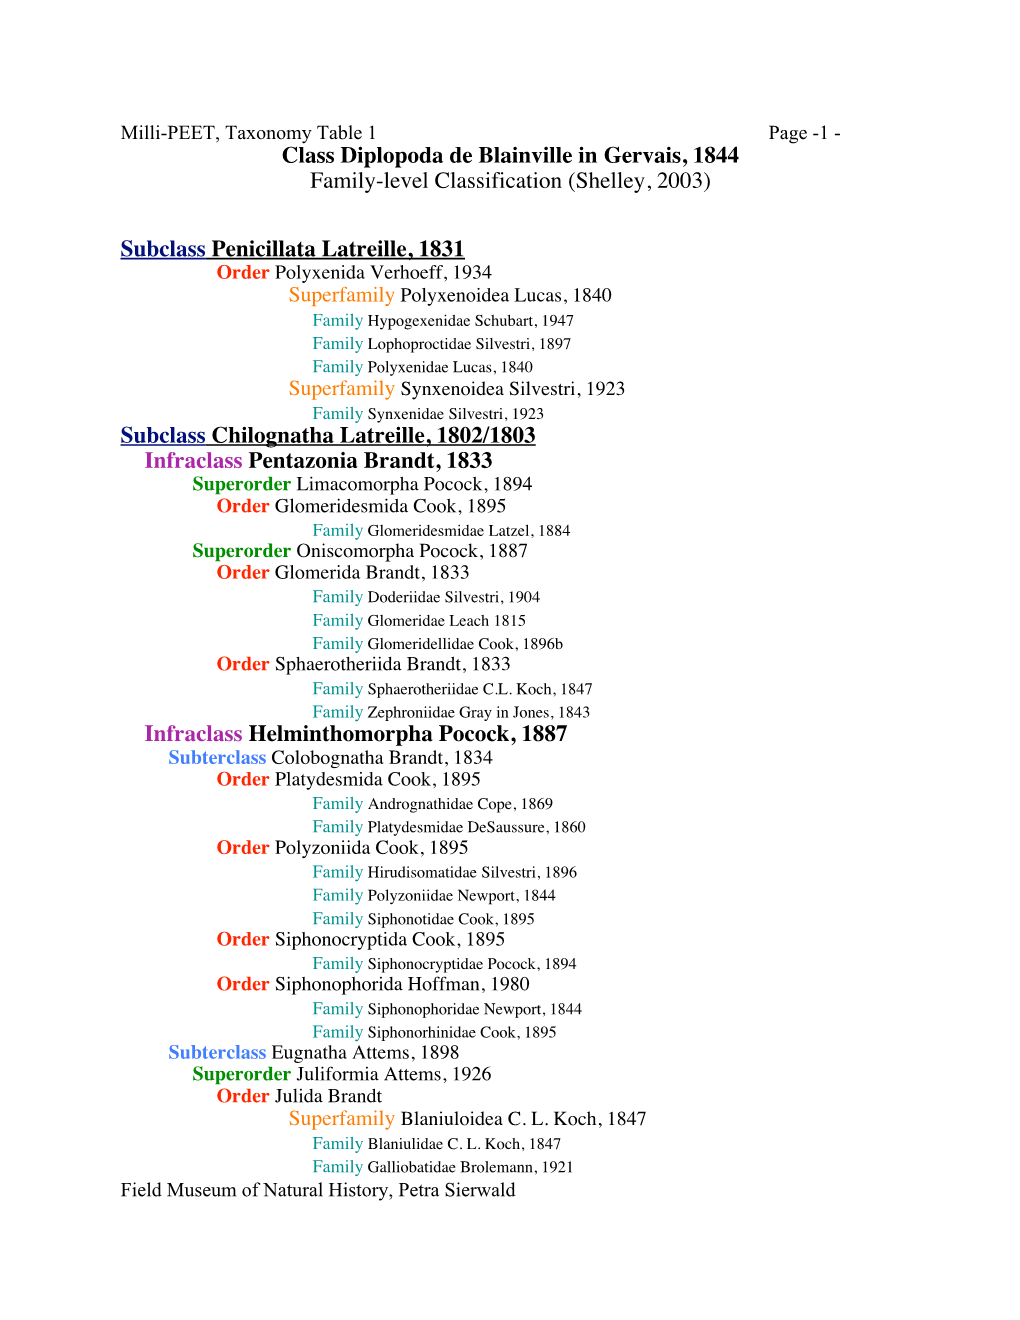 Table 1 Page -1 - Class Diplopoda De Blainville in Gervais, 1844 Family-Level Classification (Shelley, 2003)